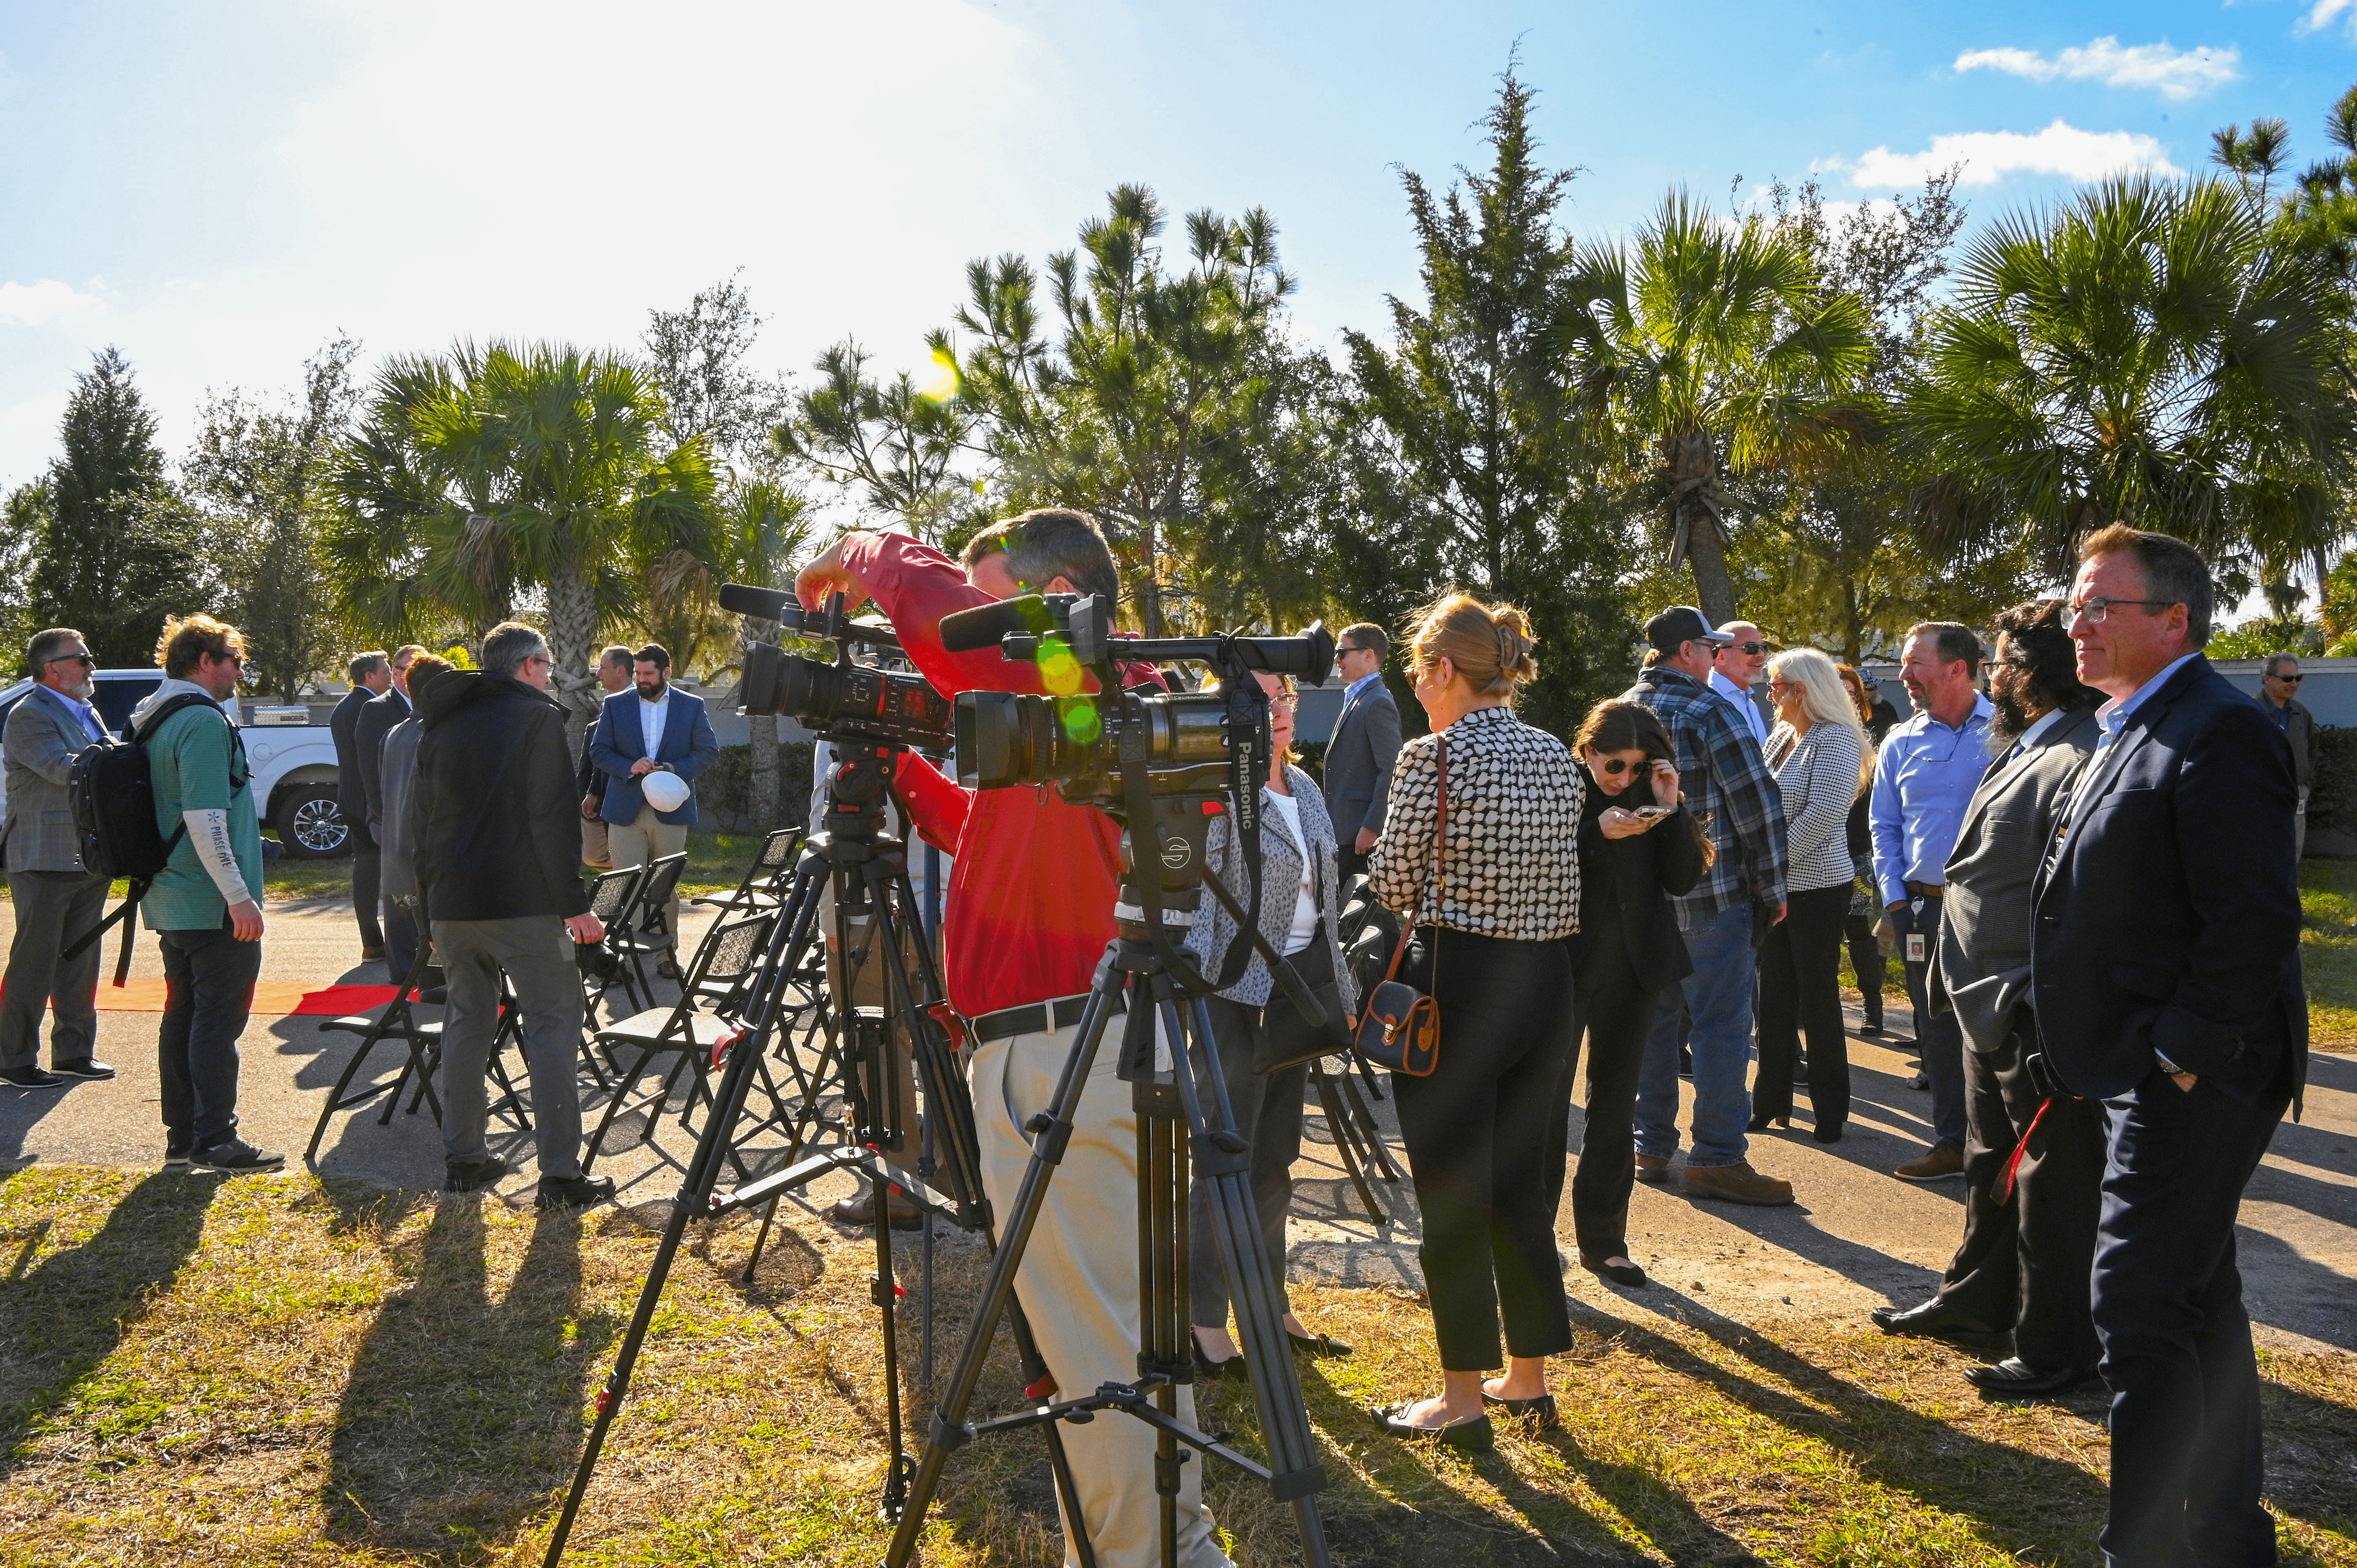 Cameras being set up to record the groundbreaking